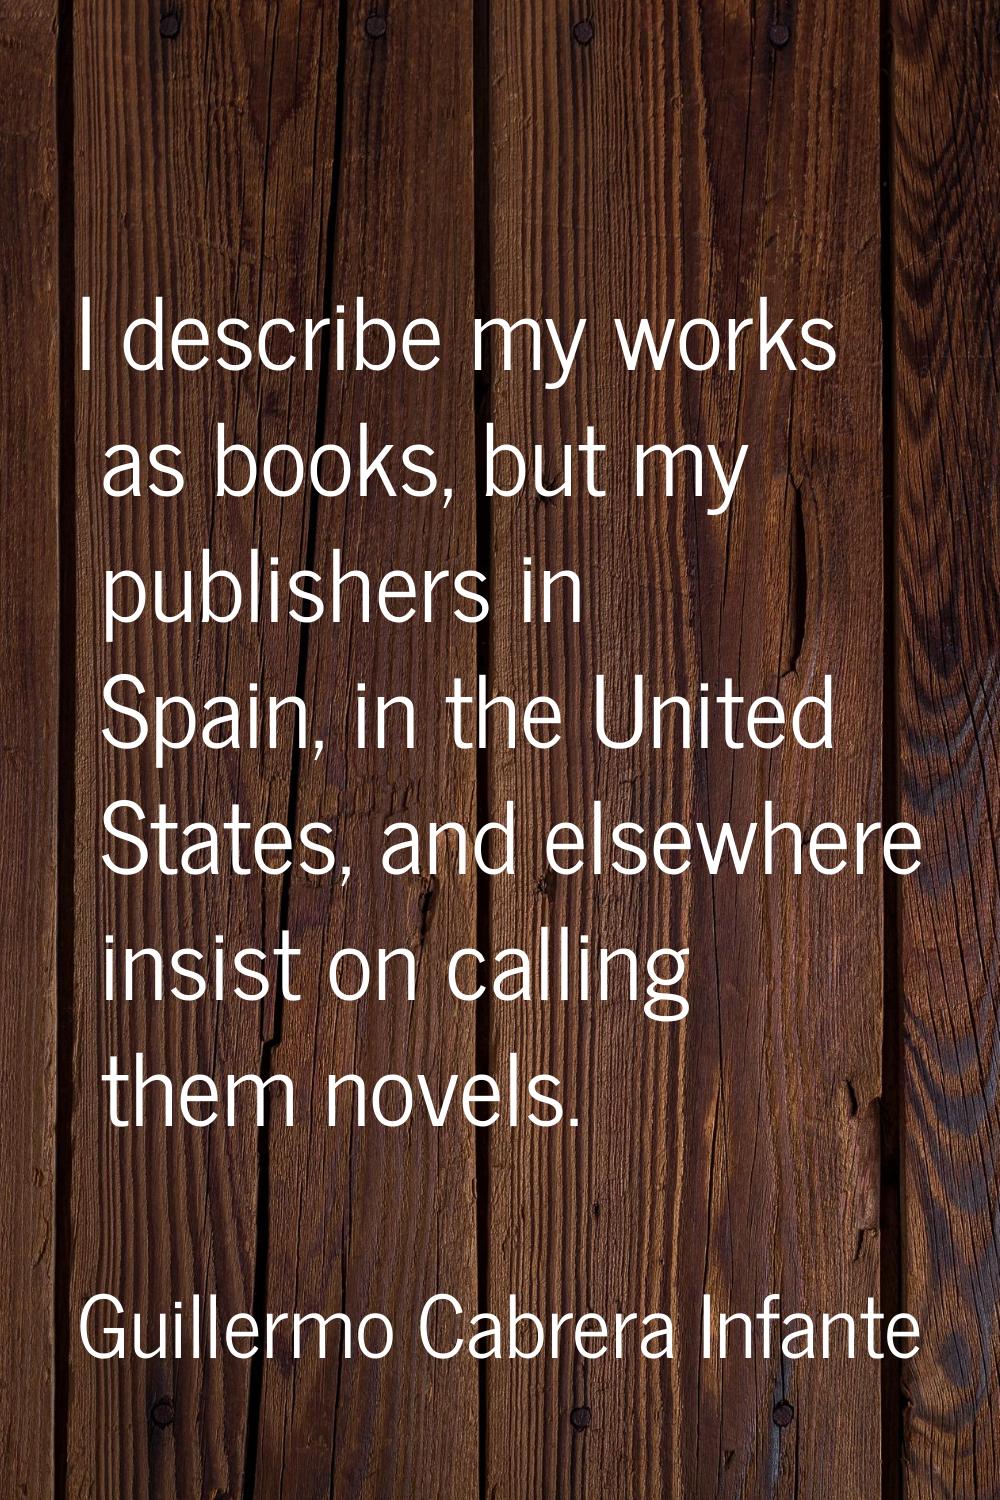 I describe my works as books, but my publishers in Spain, in the United States, and elsewhere insis